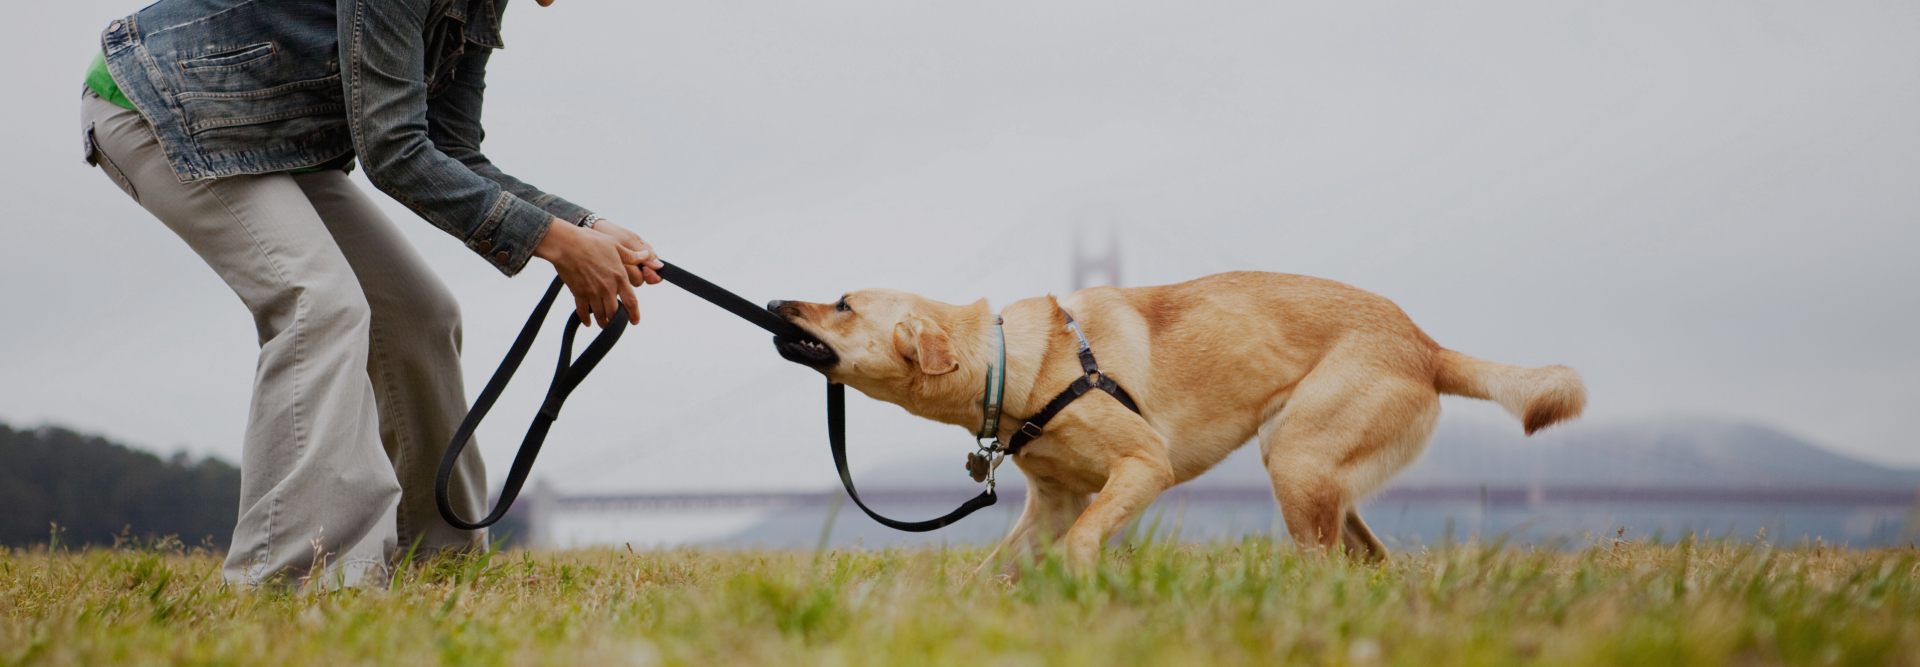 A dog enthusiastically pulls on its leash while being held by a person in a denim jacket and beige pants. They are outdoors on grass with a blurred cityscape and bridge visible in the background, perhaps capturing the serene moment before consulting personal injury attorneys for advice.